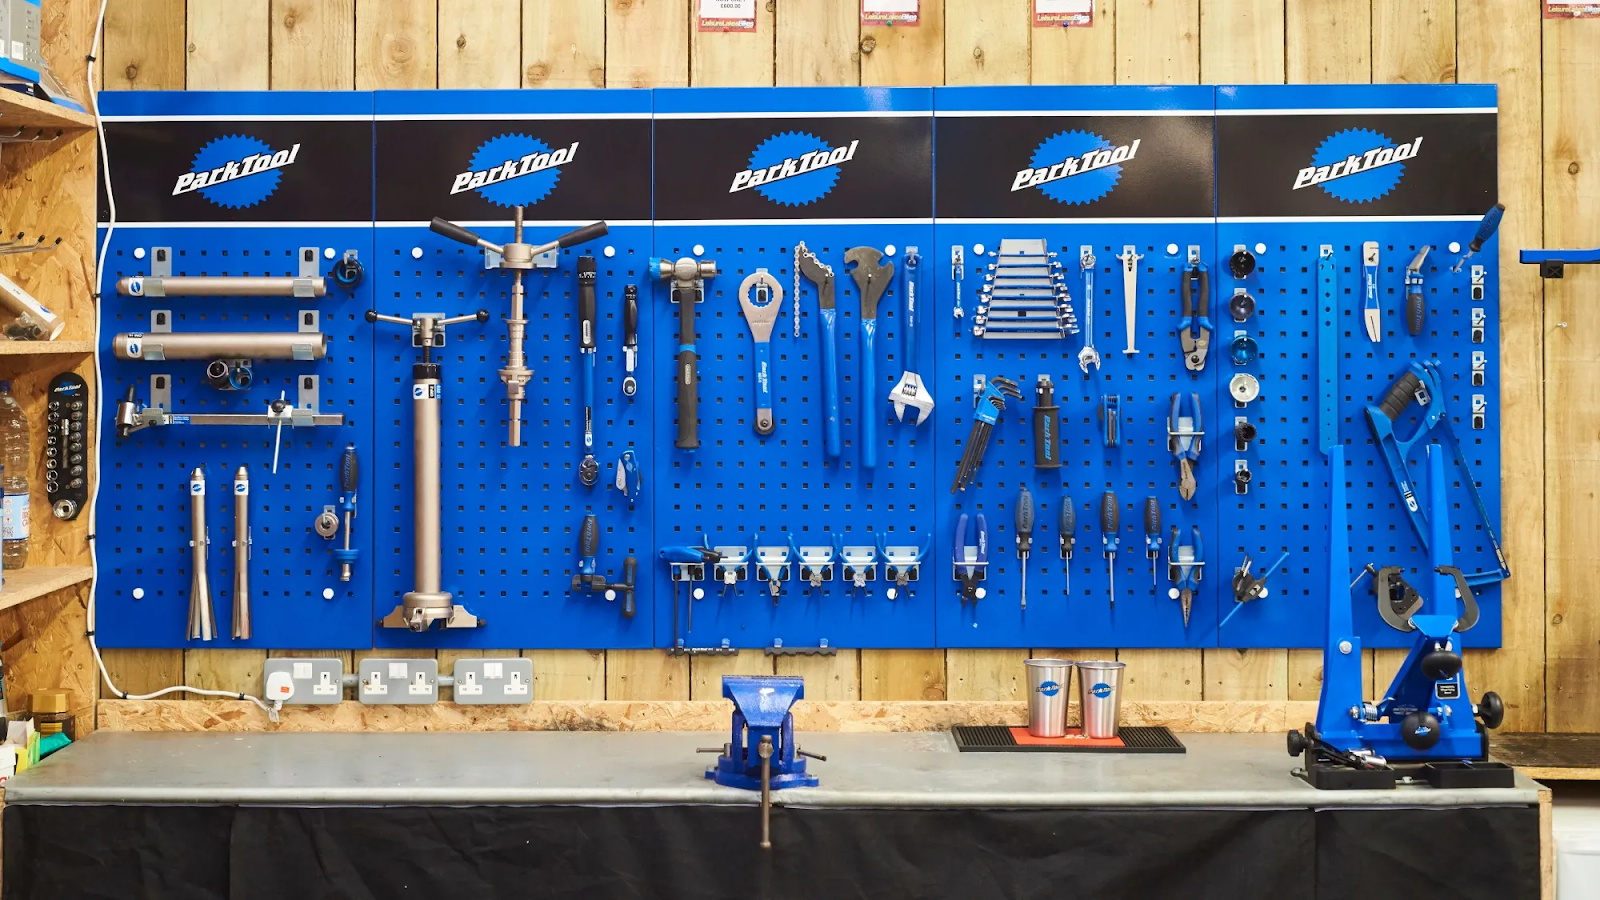 This Park Tool set has all the mountain bike tools that you could need to do any maintenance and repairs to your bike.